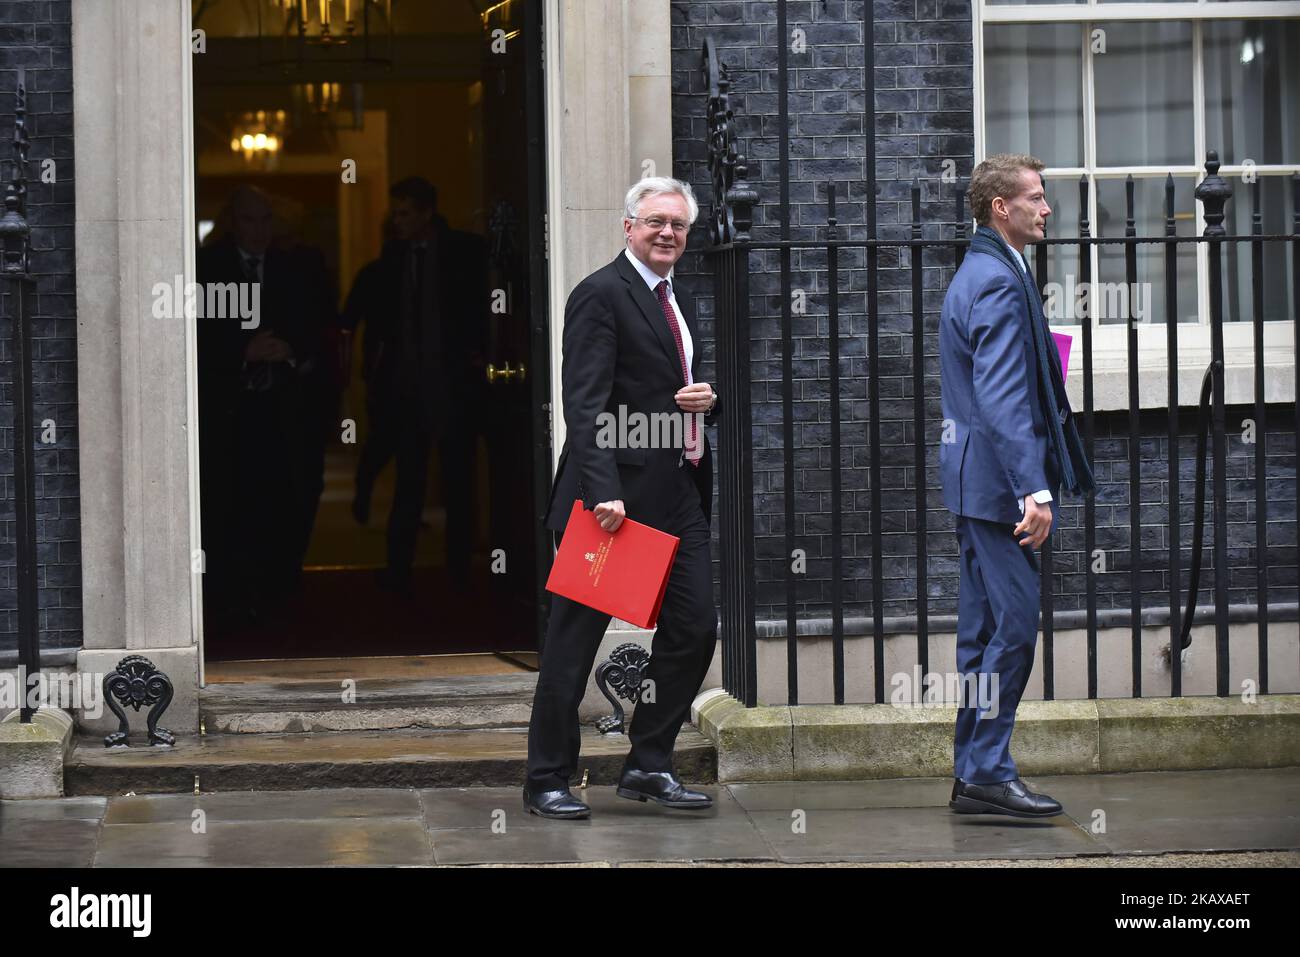 Brexit minister David Davis leaves 10 Downing Street after attending the weekly Cabinet Meeting, London on March 27, 2018. Prime Minister Theresa May is facing another Brexit hurdle after the opposition Labour Party announced its pushing for a legal commitment to avoid a hard border with Ireland after Britain leaves the European Union. The Migration Advisory Committee (MAC) said businesses are concerned about their ability to recruit workers from the EU after Britain leaves the EU. UK employers also see EU workers as 'more reliable' and eager than their British counterparts, the report said. ( Stock Photo